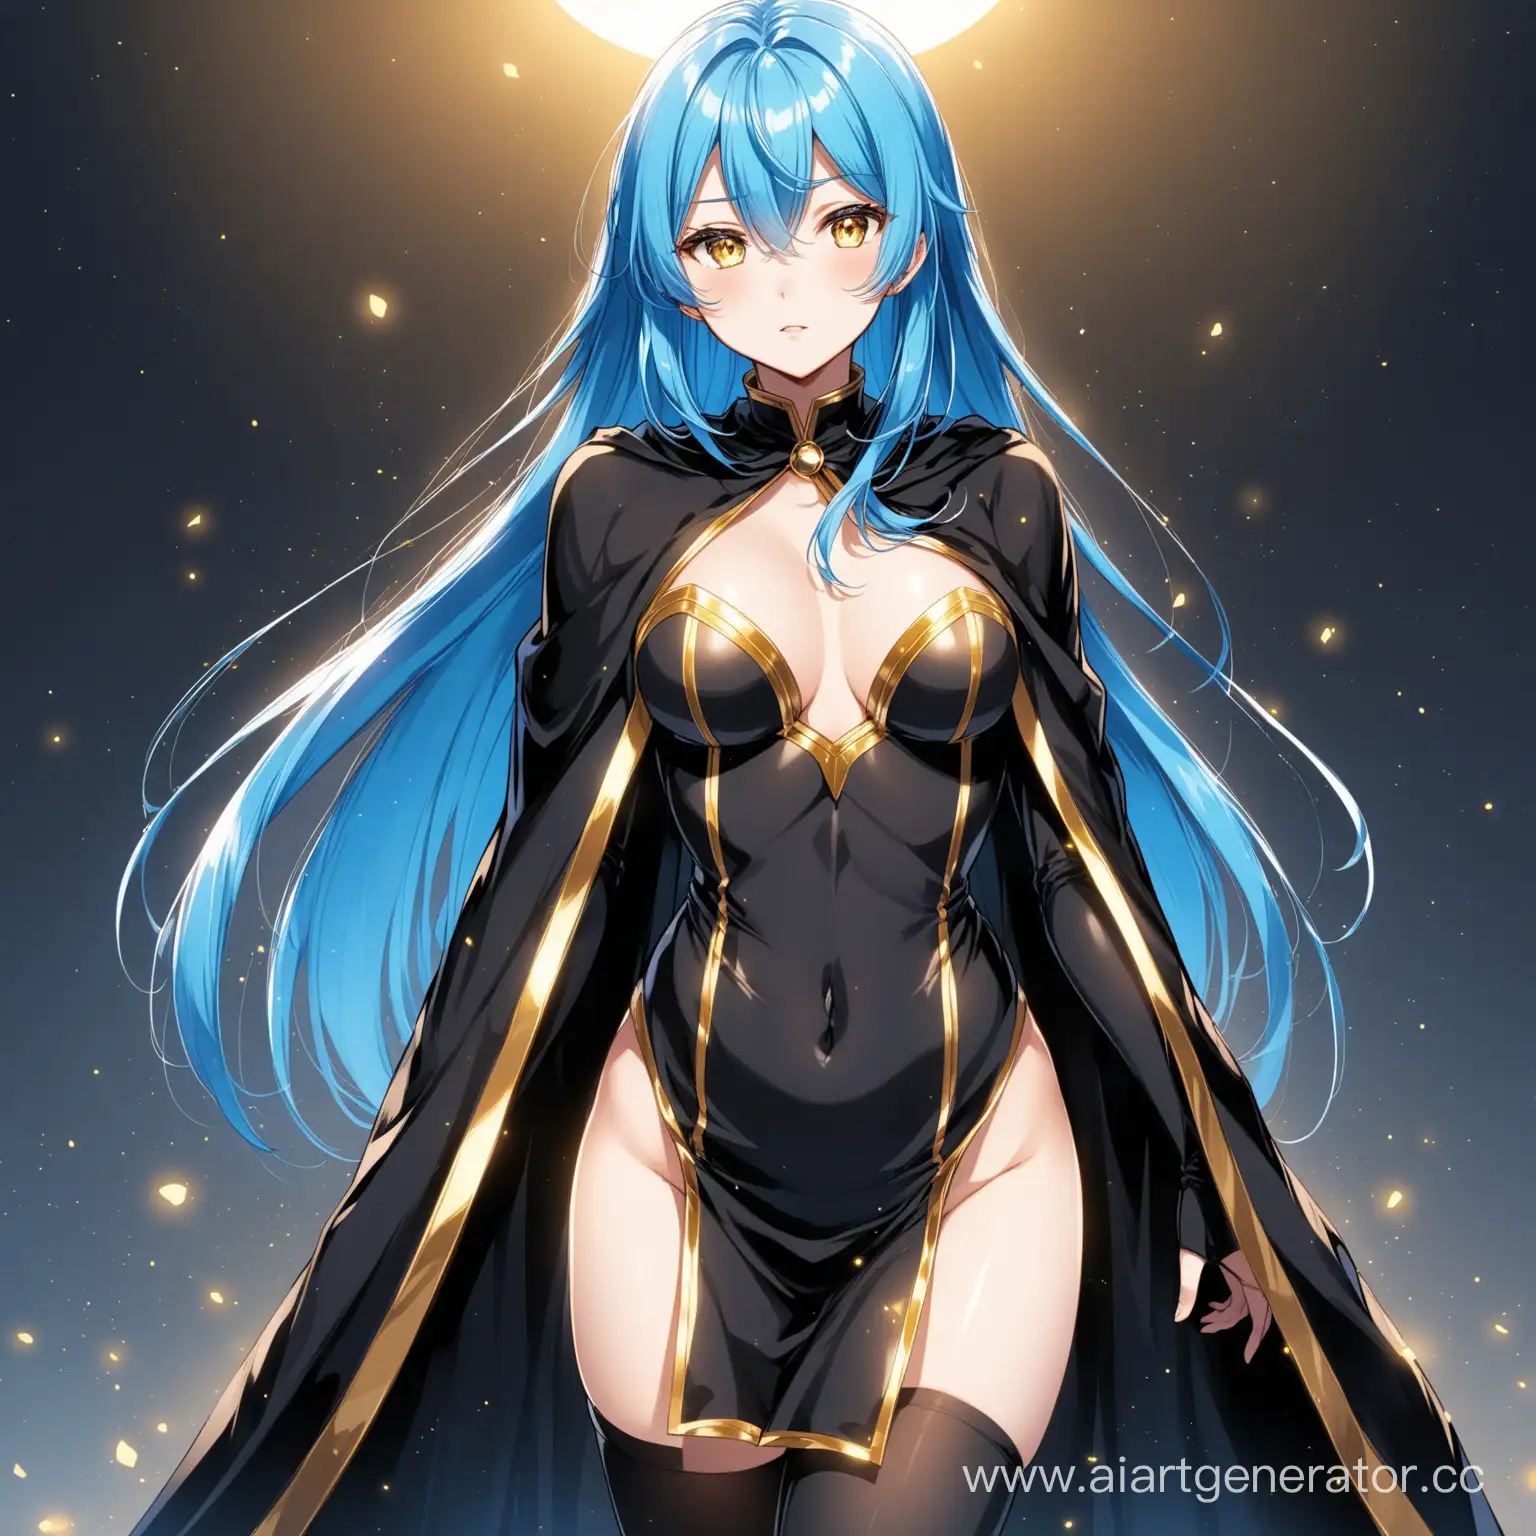 Mysterious-Anime-Girl-in-Elegant-Black-and-Gold-Cloak-with-Blue-Hair